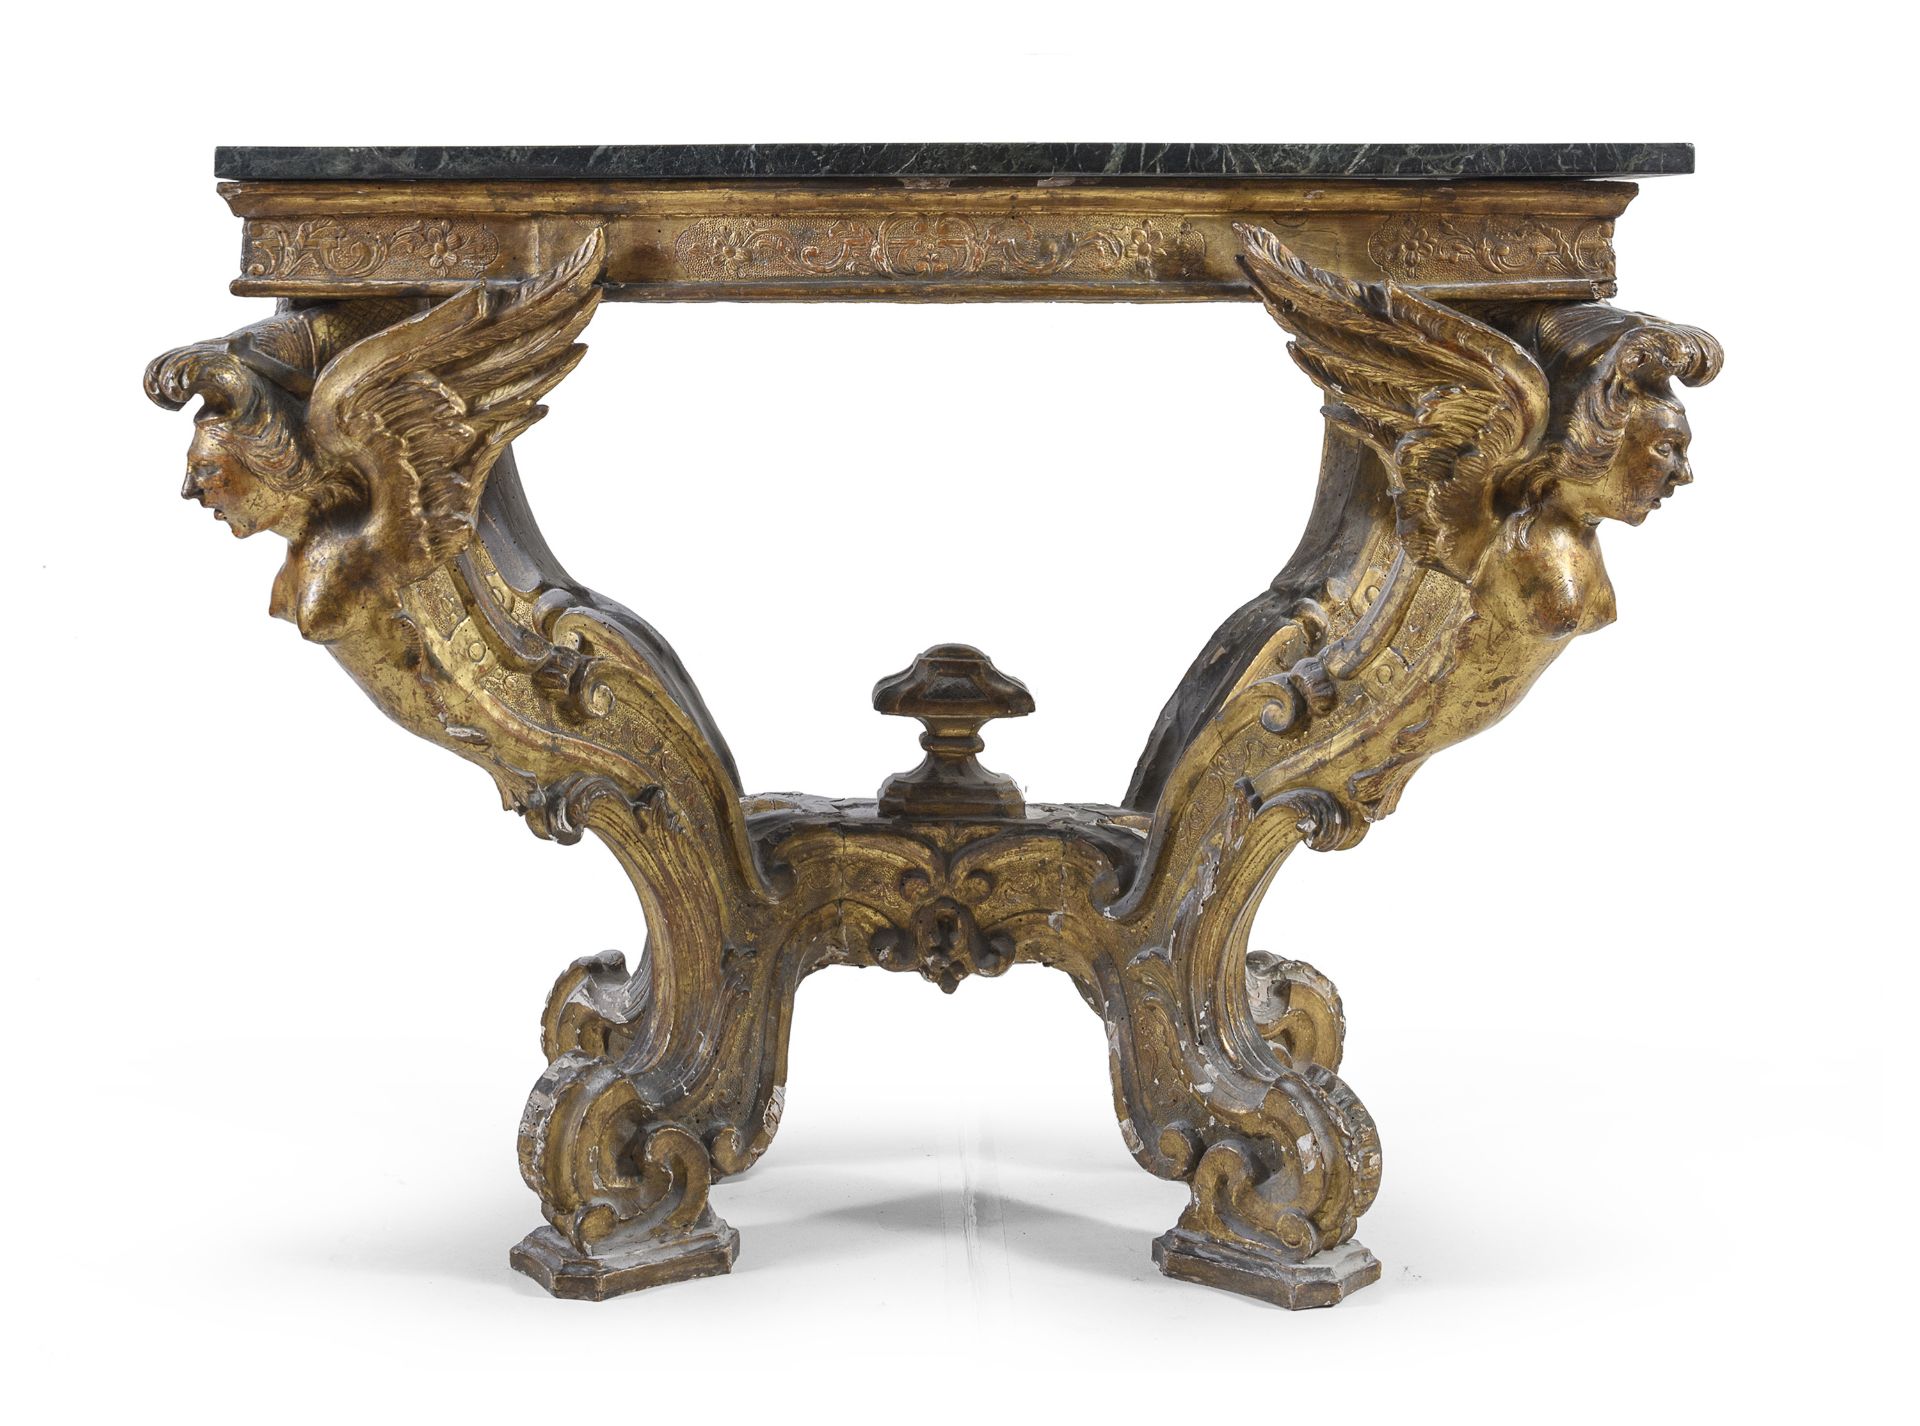 BEAUTIFUL CONSOLE IN GILTWOOD PROBABLY ROME LOUIS XIV PERIOD - Image 2 of 2